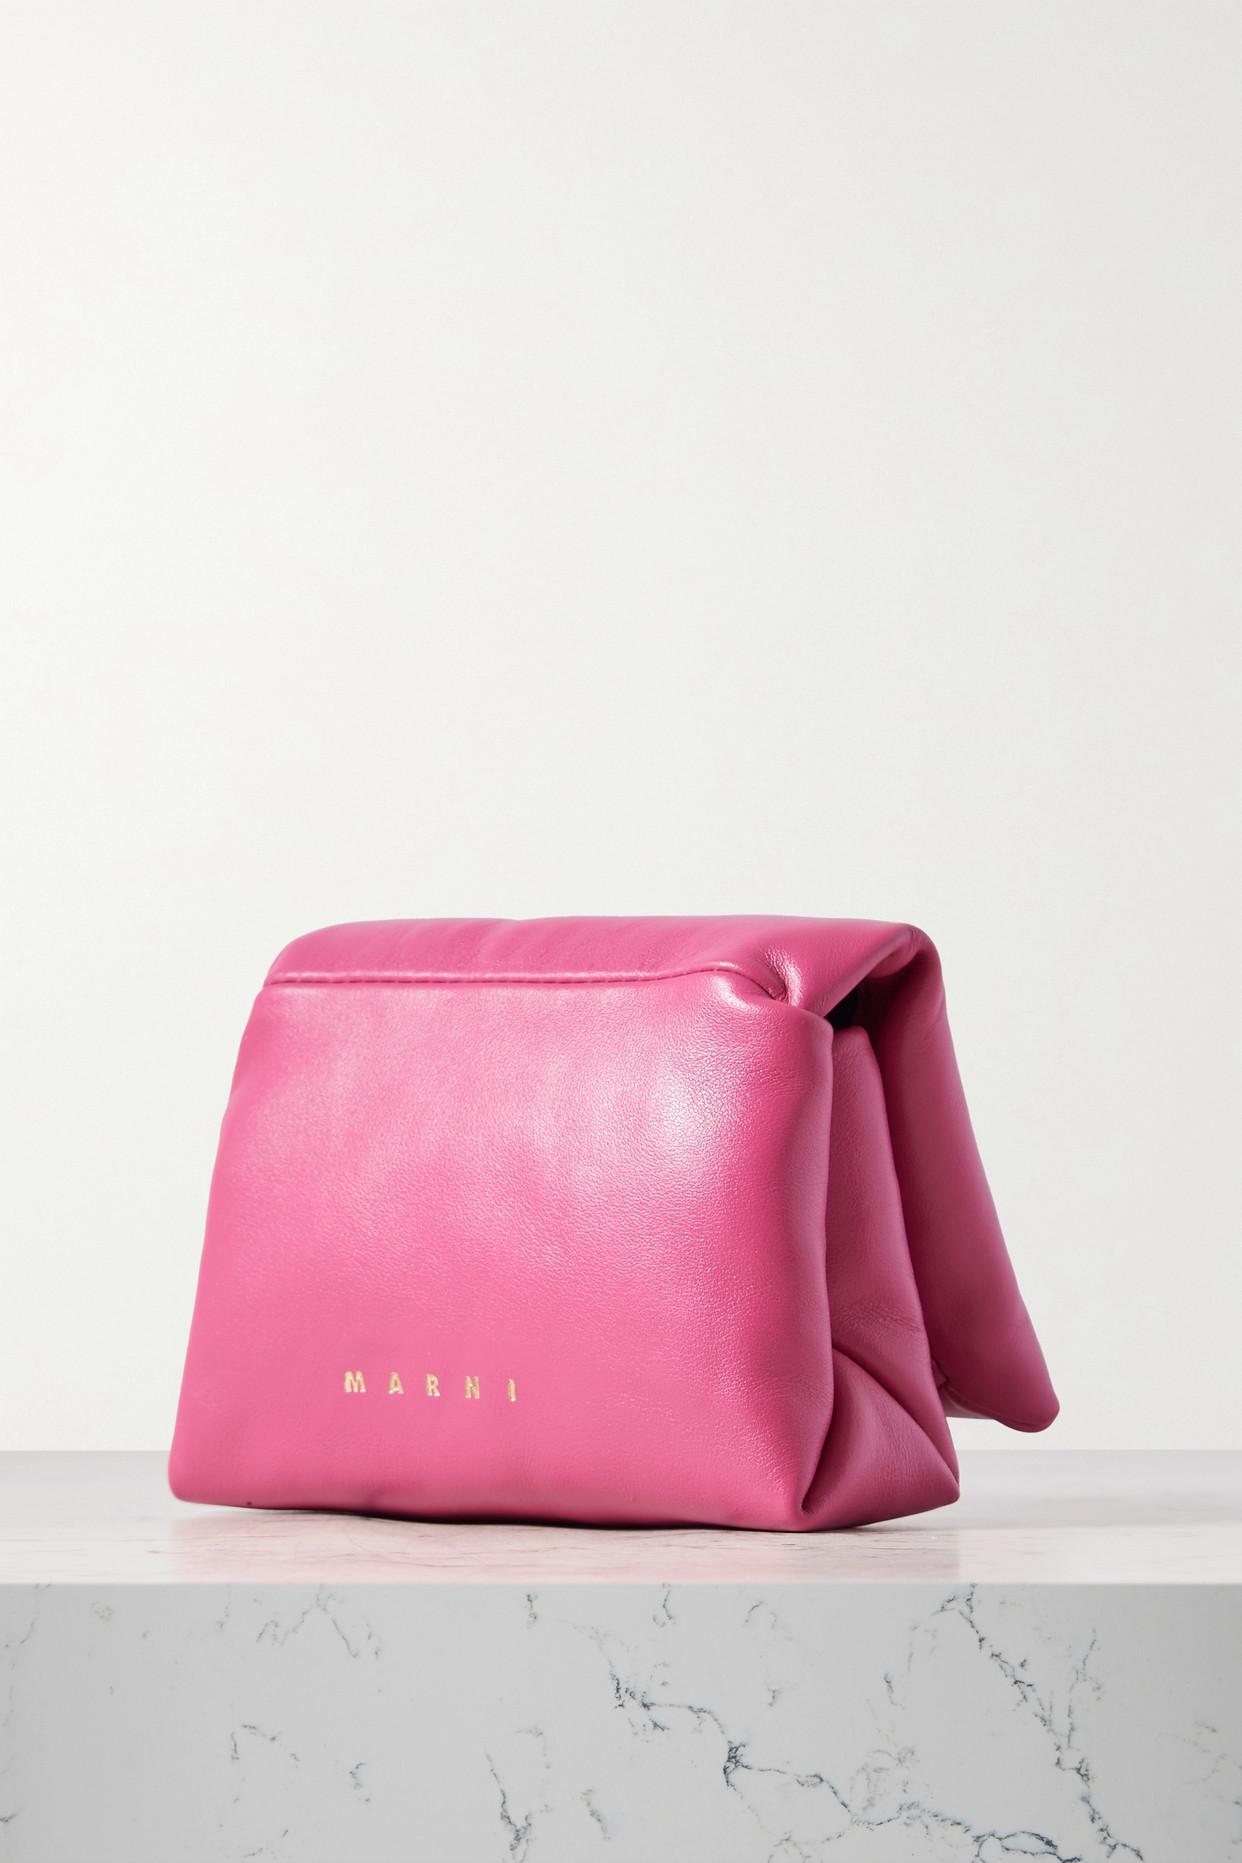 Marni Prisma Mini Padded Leather Shoulder Bag in Pink | Lyst